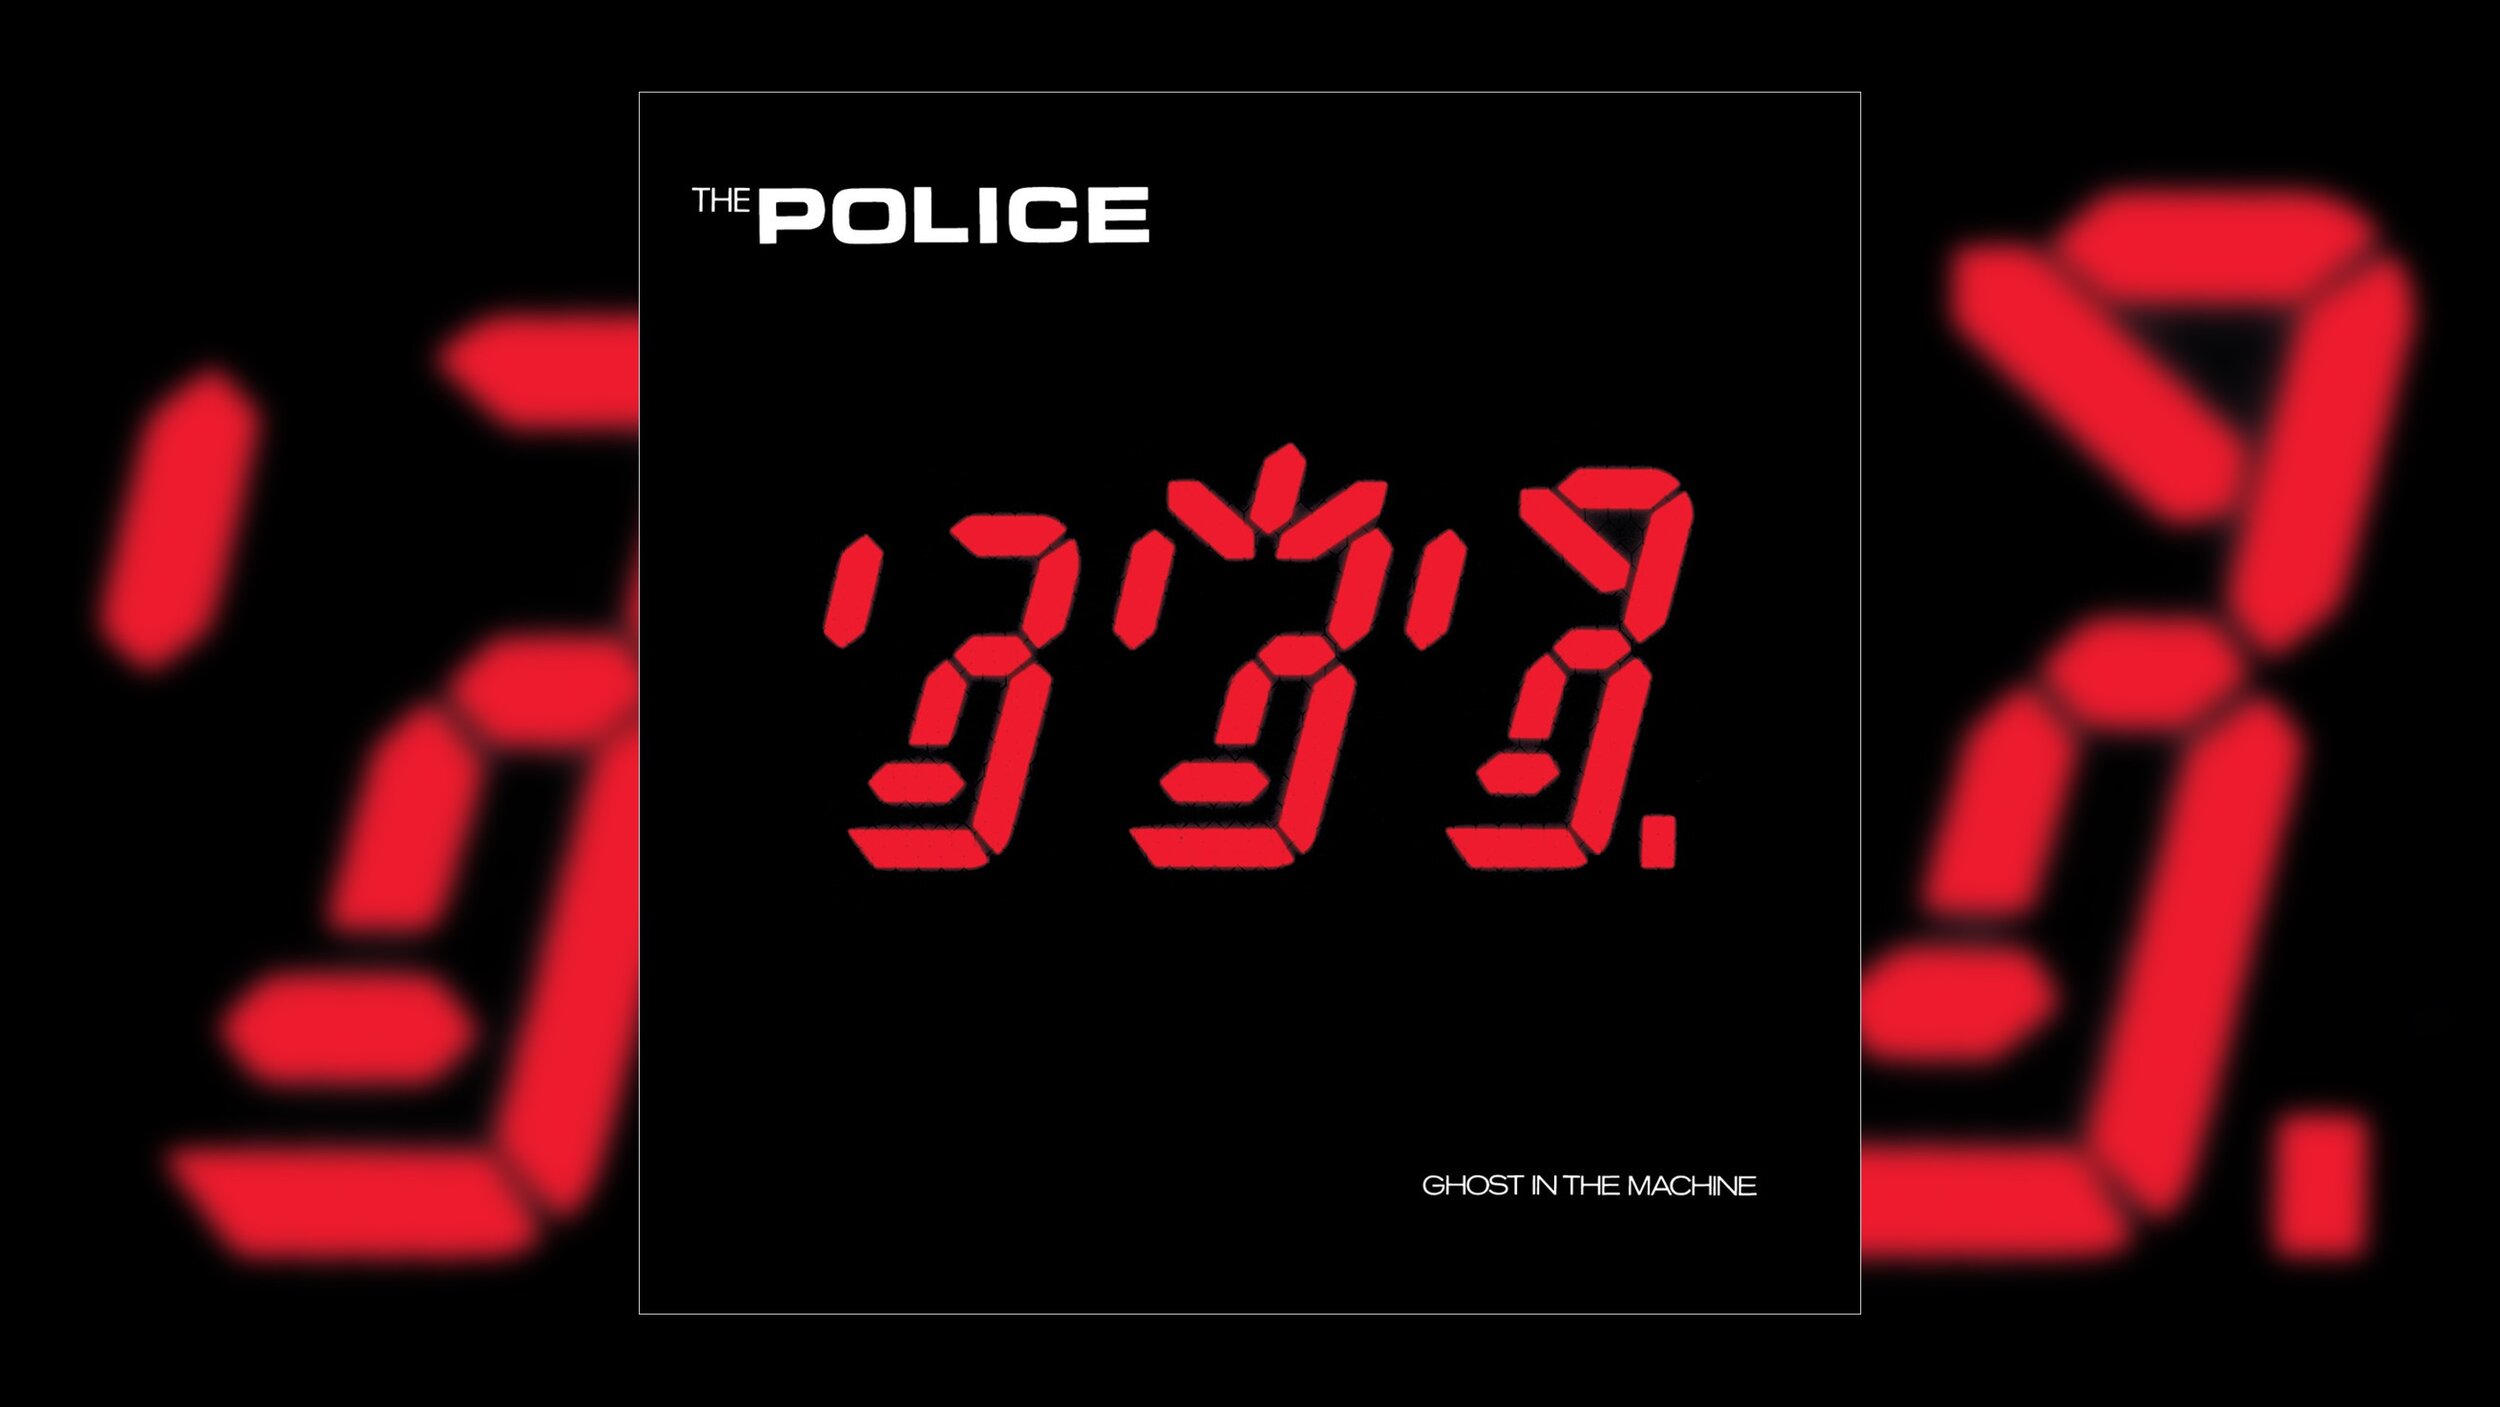 The Police: Sting on the 40th anniversary of 'Every Breath You